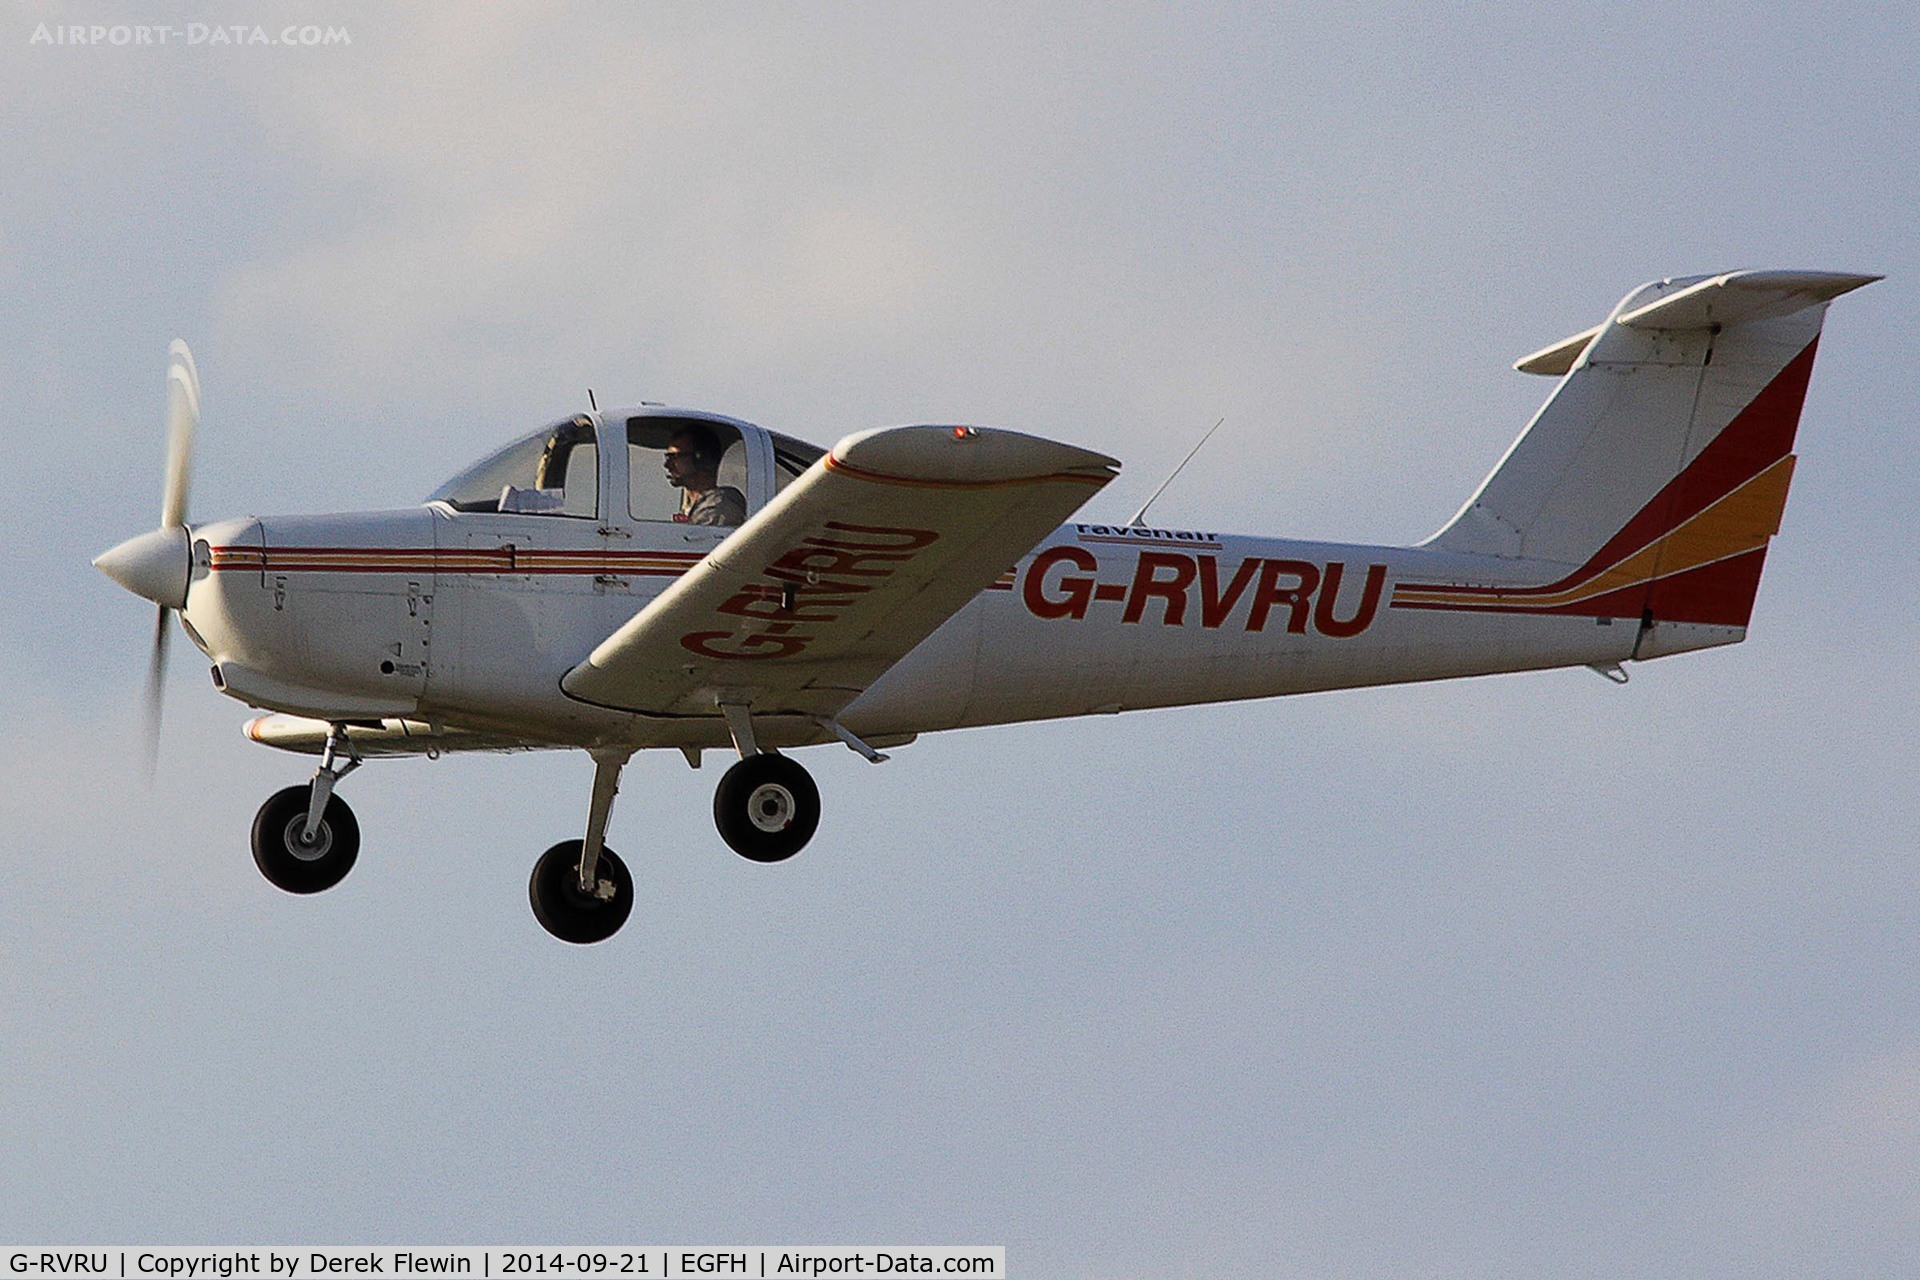 G-RVRU, 1980 Piper PA-38-112 Tomahawk Tomahawk C/N 38-80A0081, Visiting Tomahawk, Liverpool based, previously OO-HKD, OO-GME, G-BKMK, G-NCFE, seen departing runway 22 at EGFH en-route to EGGP.